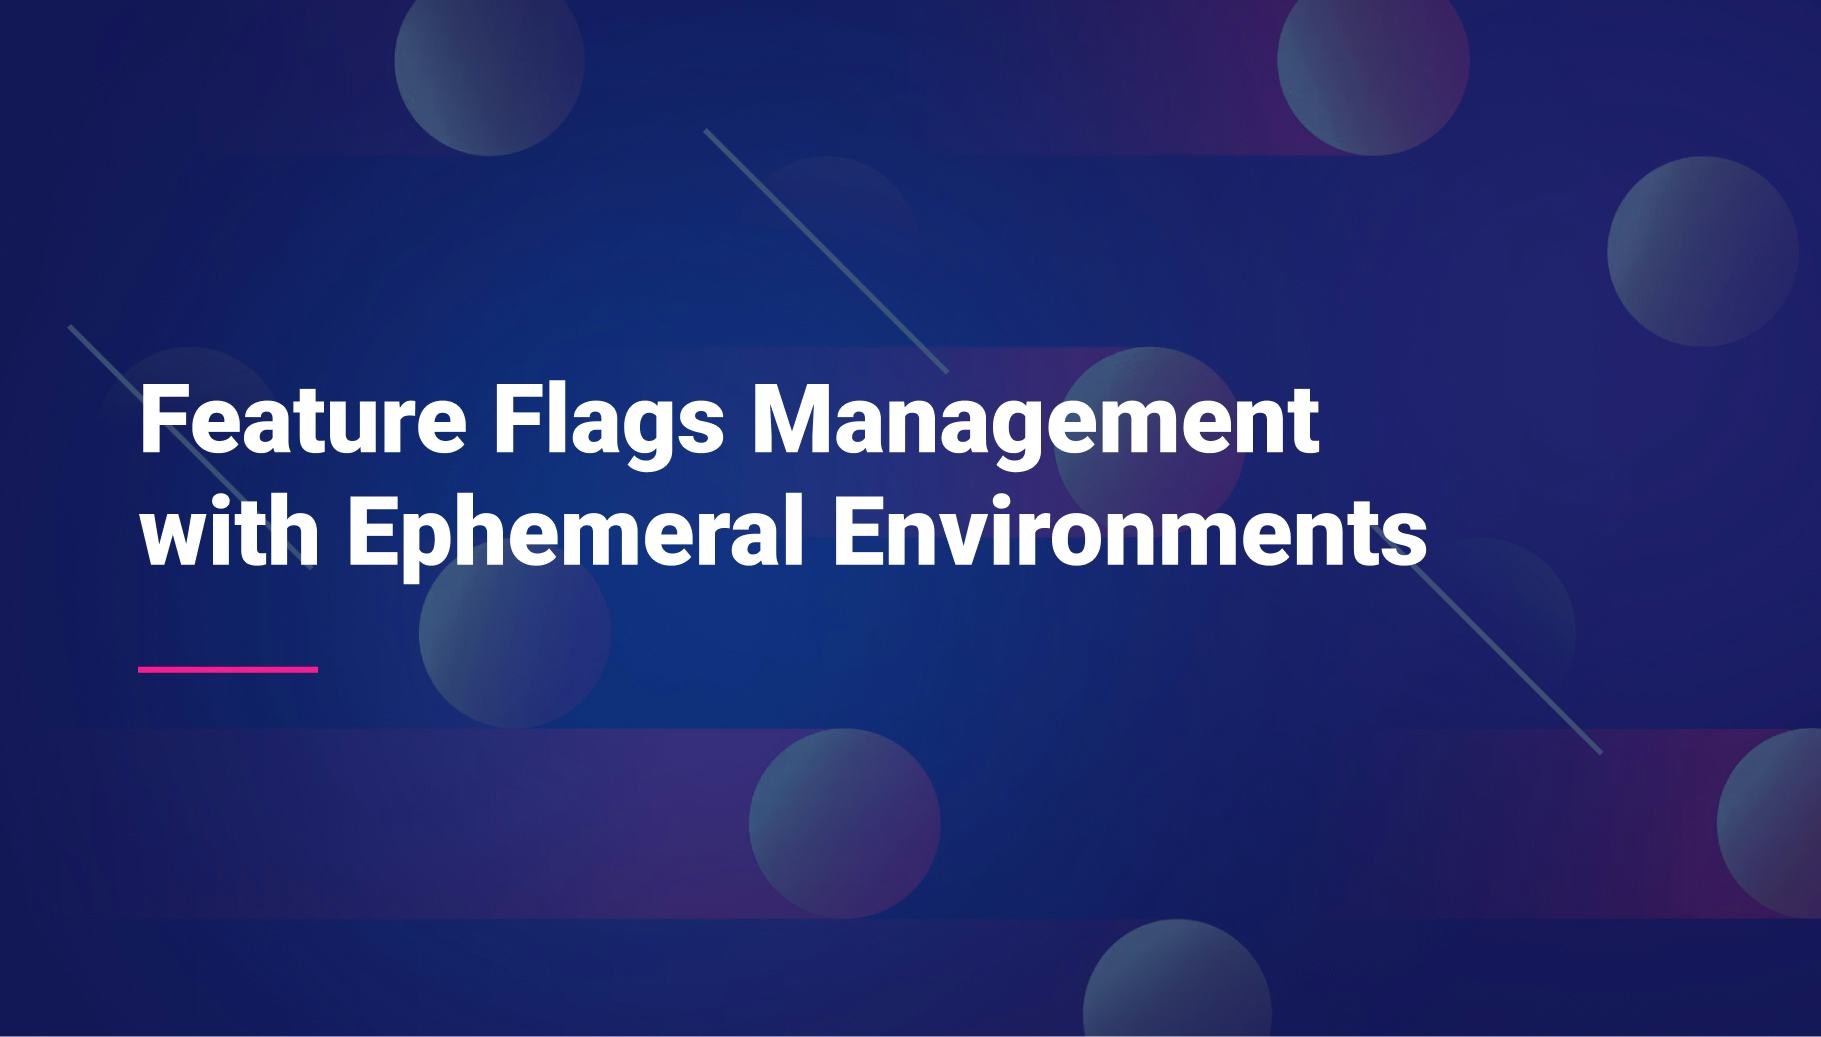 Feature Flags Management with Ephemeral Environments - Qovery